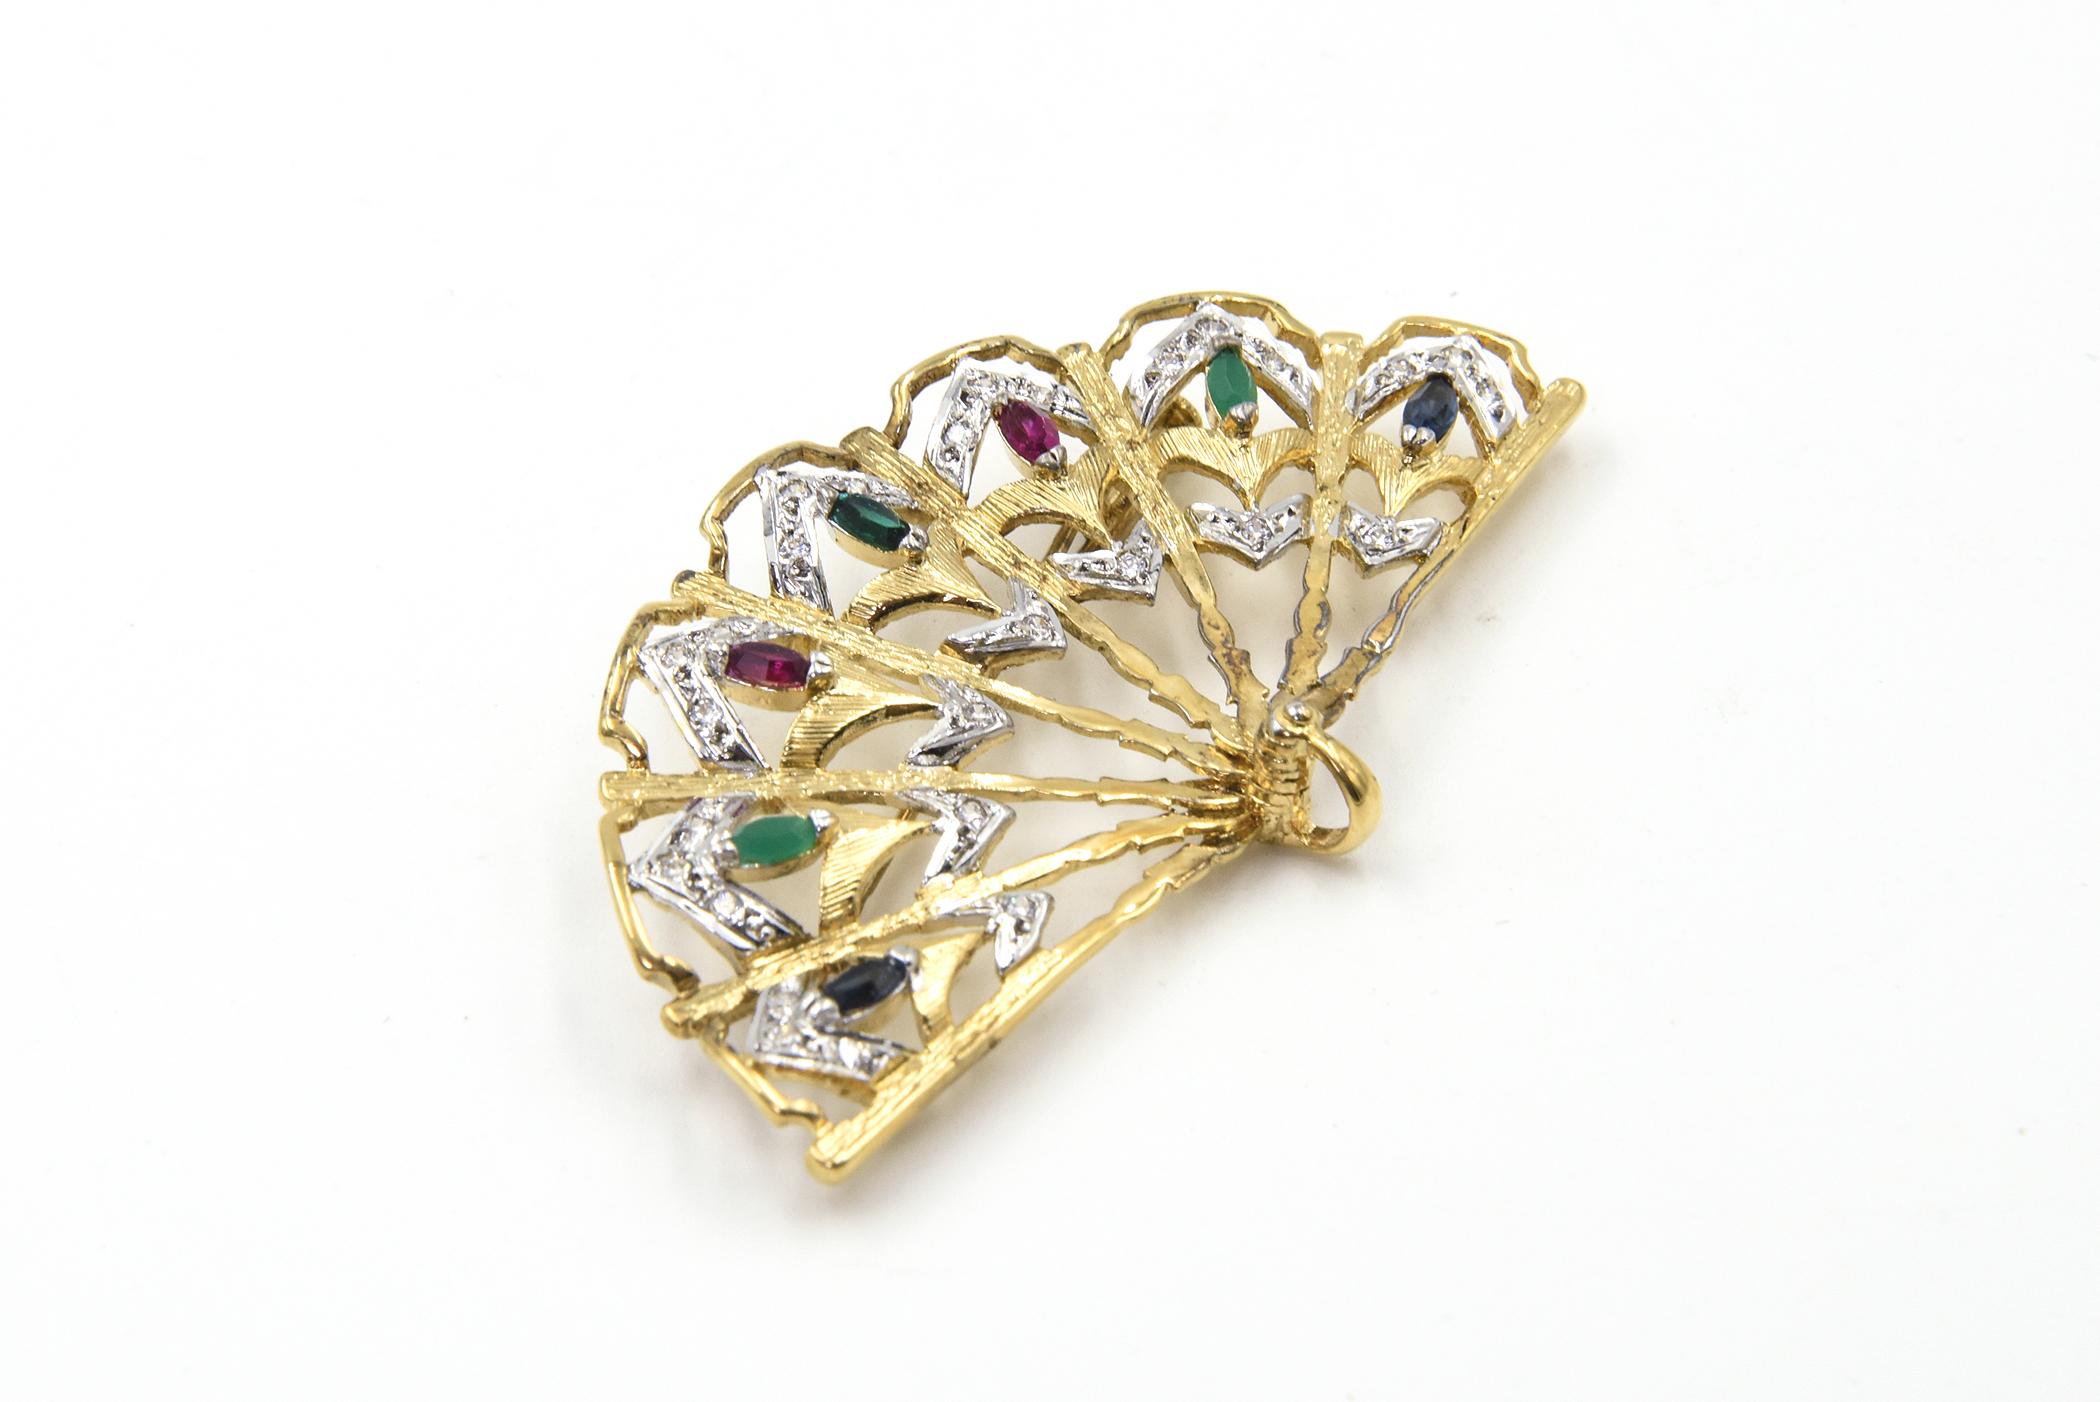 Fan Brooch and Earring Suite Vermeil Gold Tone Sterling with Faux Gemstones In Good Condition For Sale In Miami Beach, FL